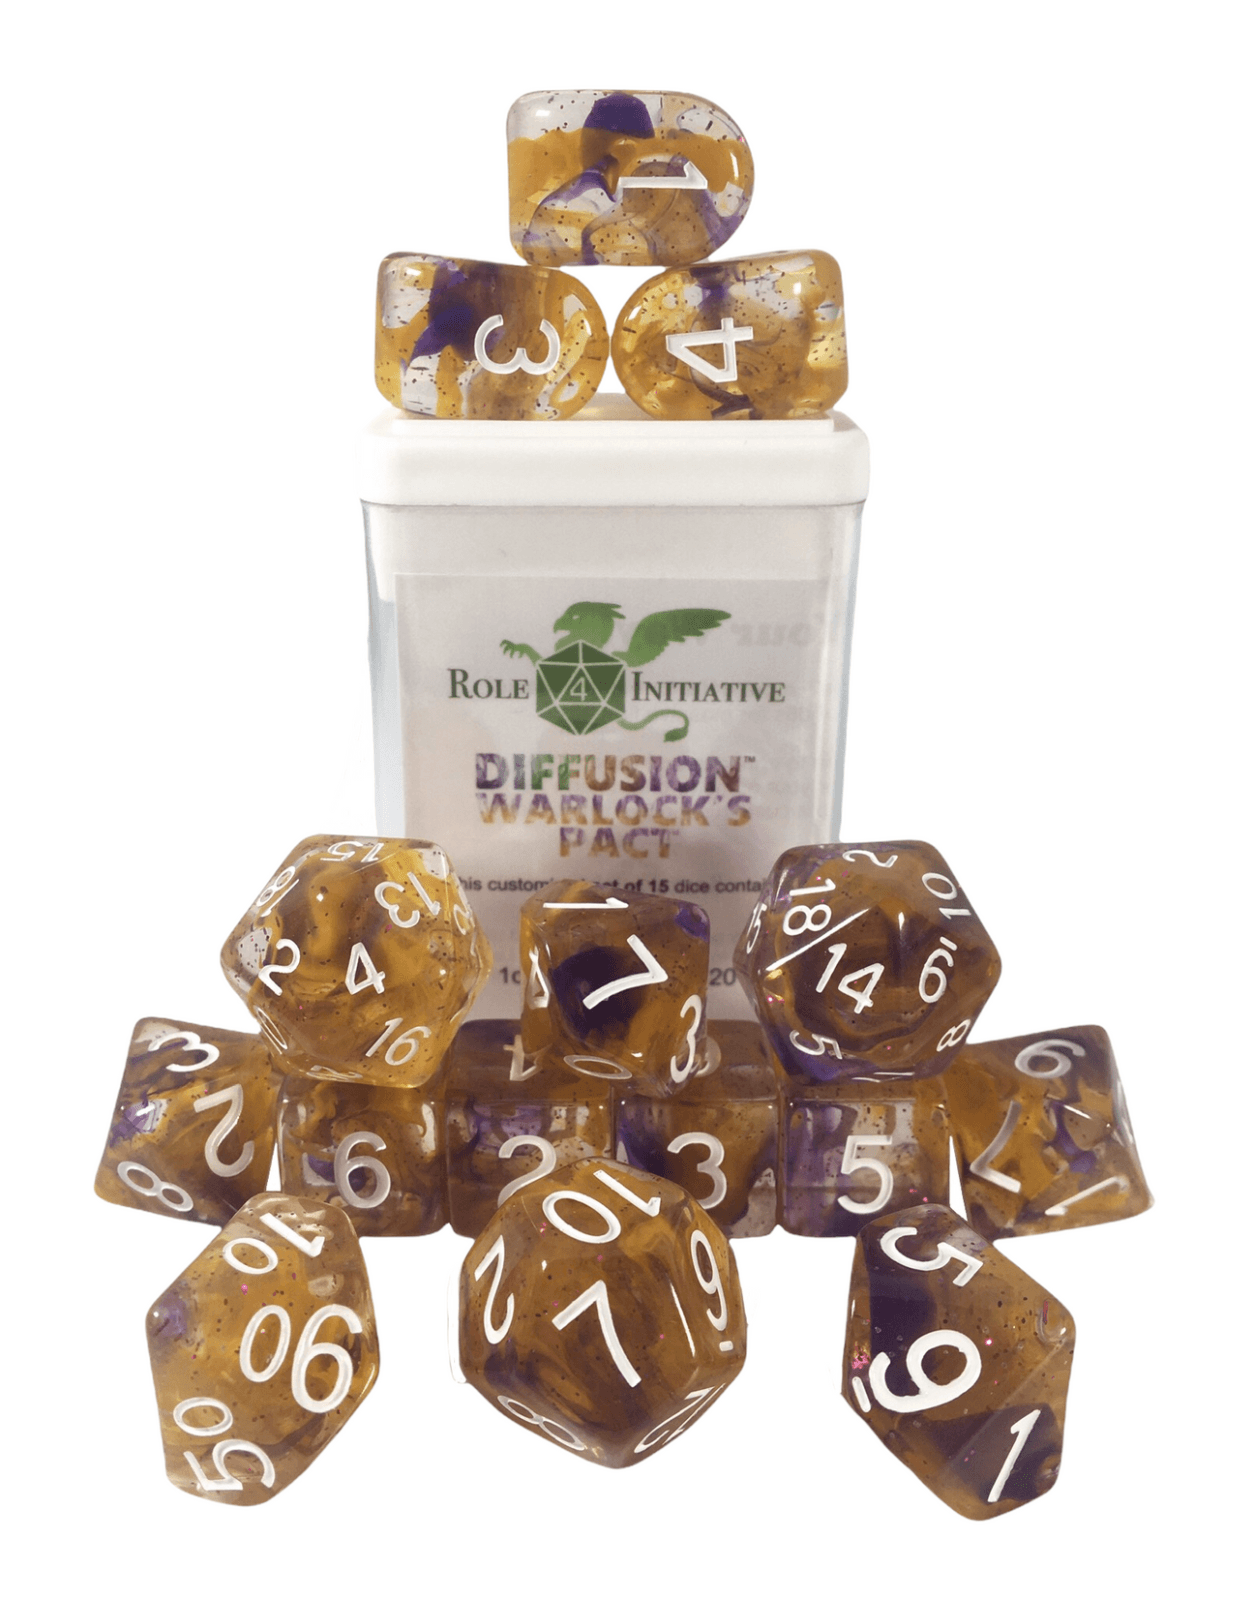 Diffusion Warlock’s Pact - 15 dice set (with Arch’d4™) - The Fourth Place